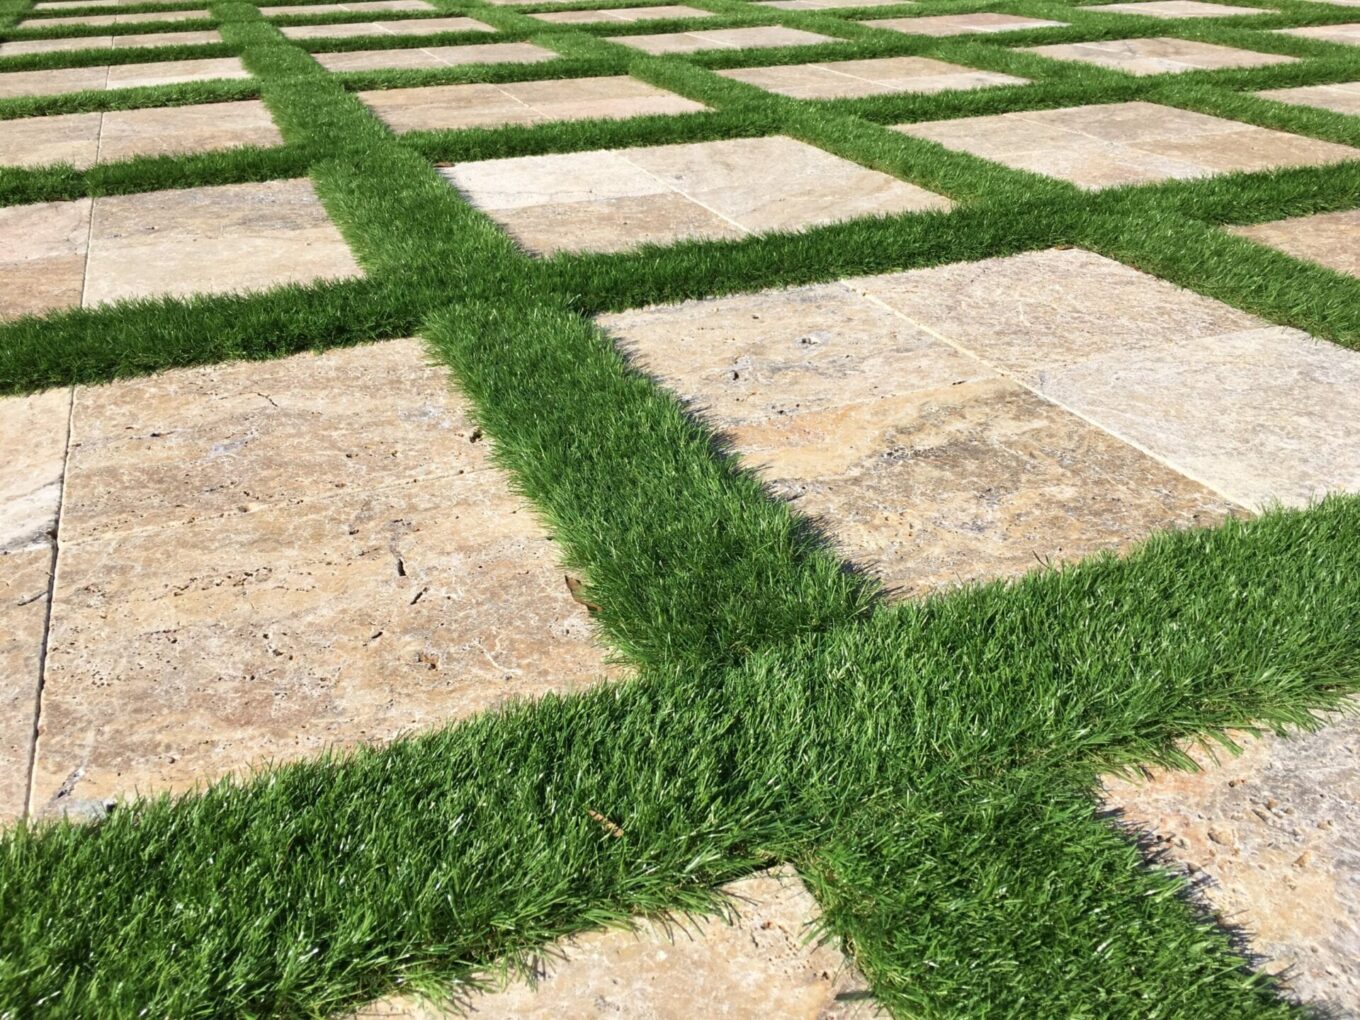 A close up of grass on the ground